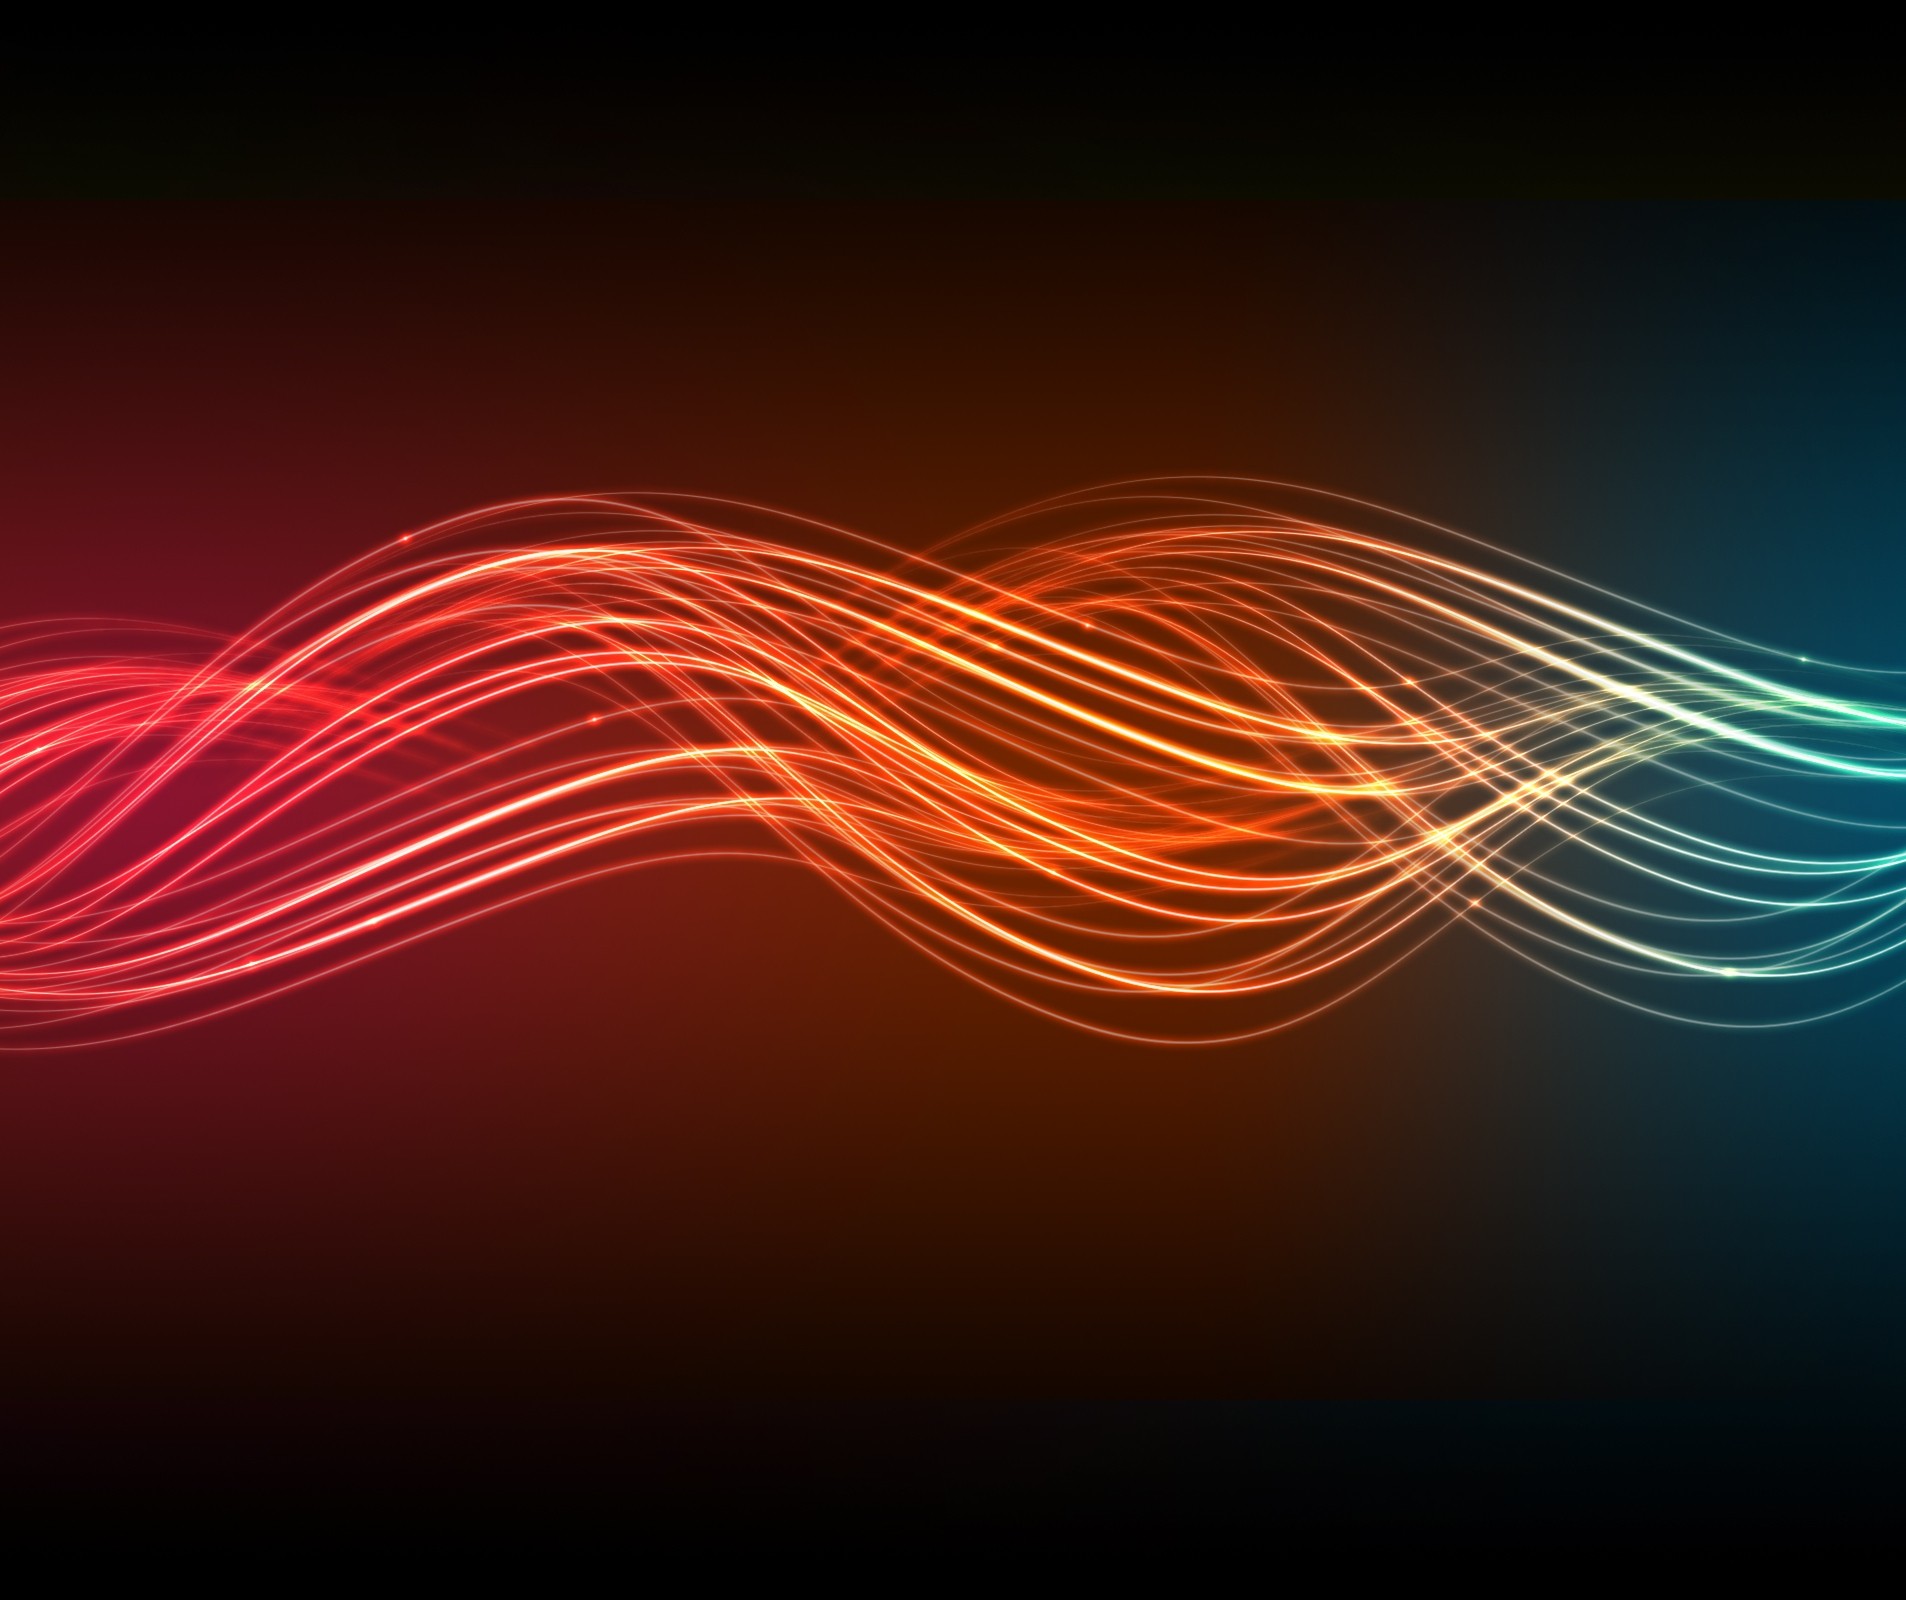 Abstract Spectrum Digital Art Lines Waveforms Red Blue 1906x1600